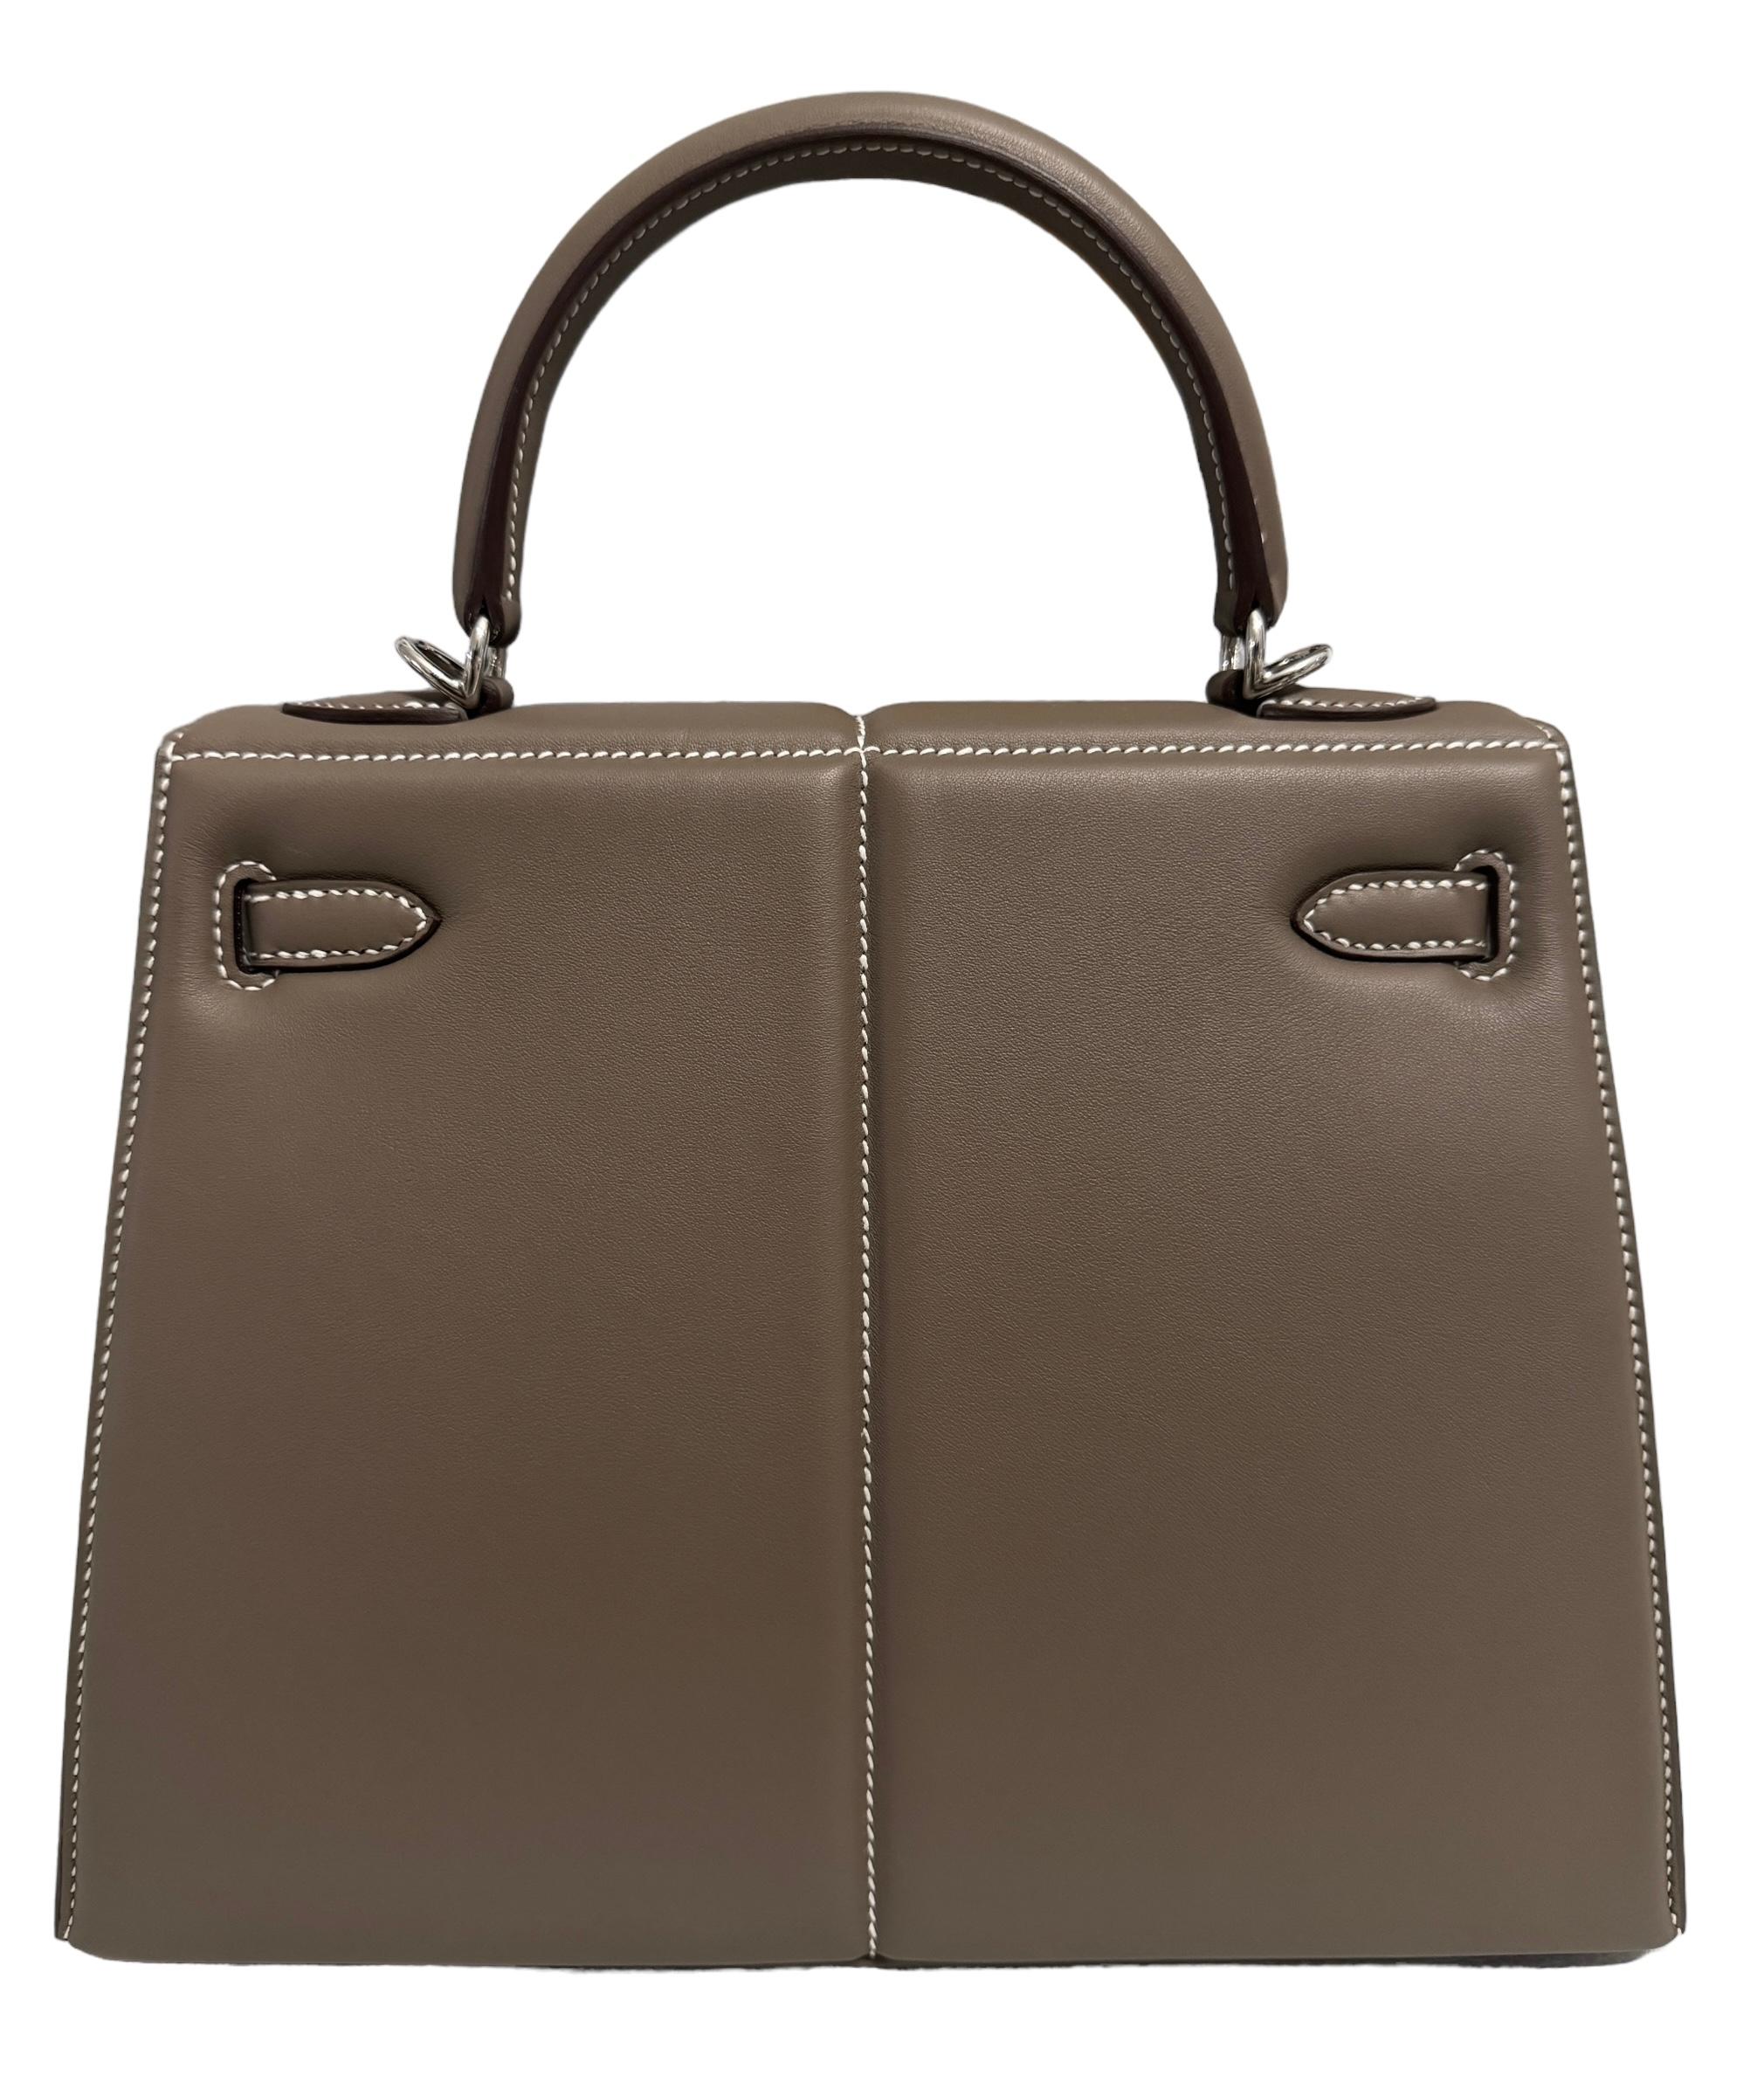 Women's or Men's Hermes Kelly 25 Sellier Padded Etoupe Gray Limited Edition Palladium Hardware For Sale